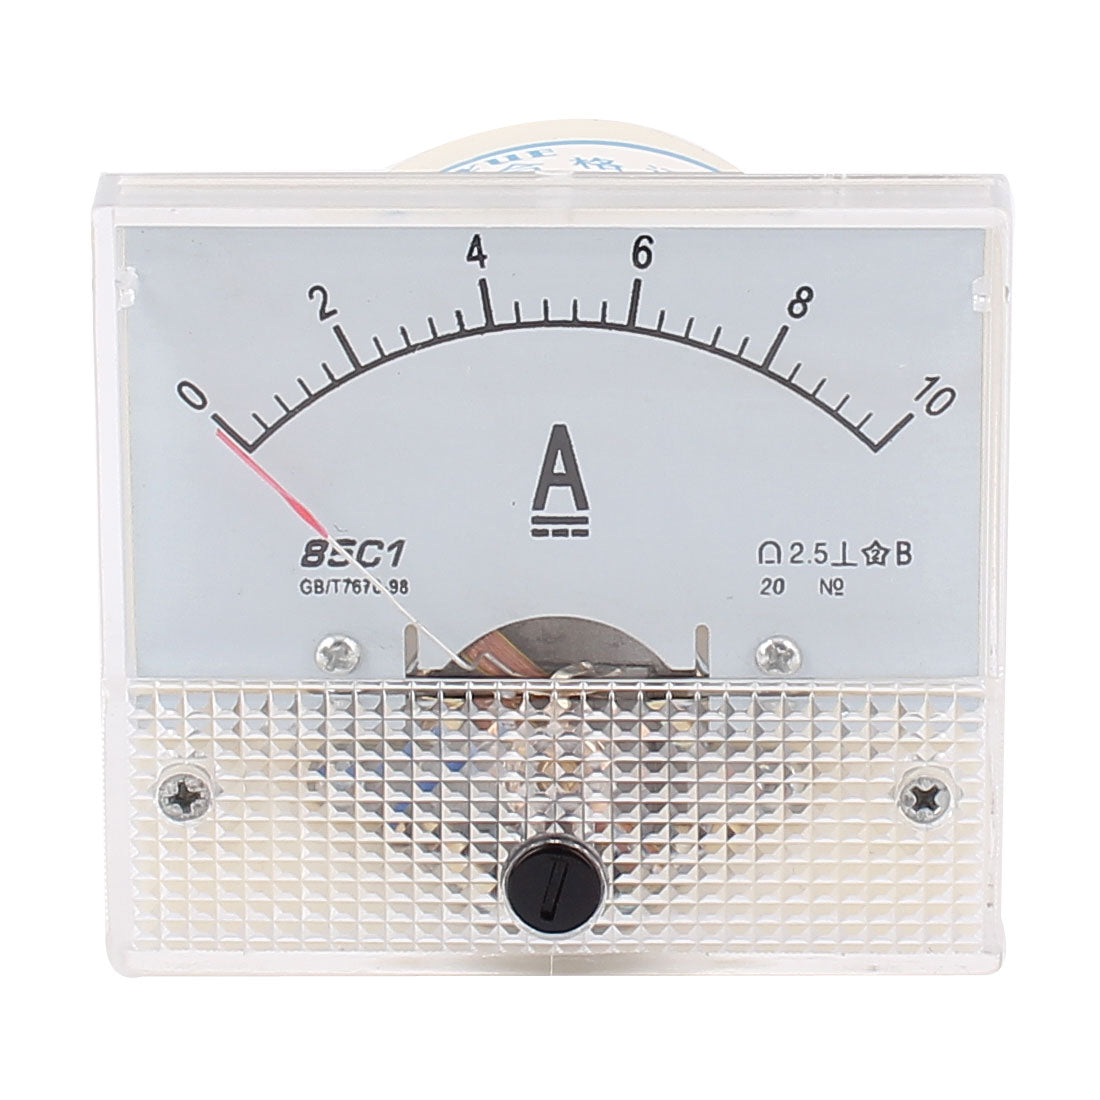 uxcell Uxcell DC 10A Analog Panel Current Meter Ammeter Gauge 85C1 0-10A